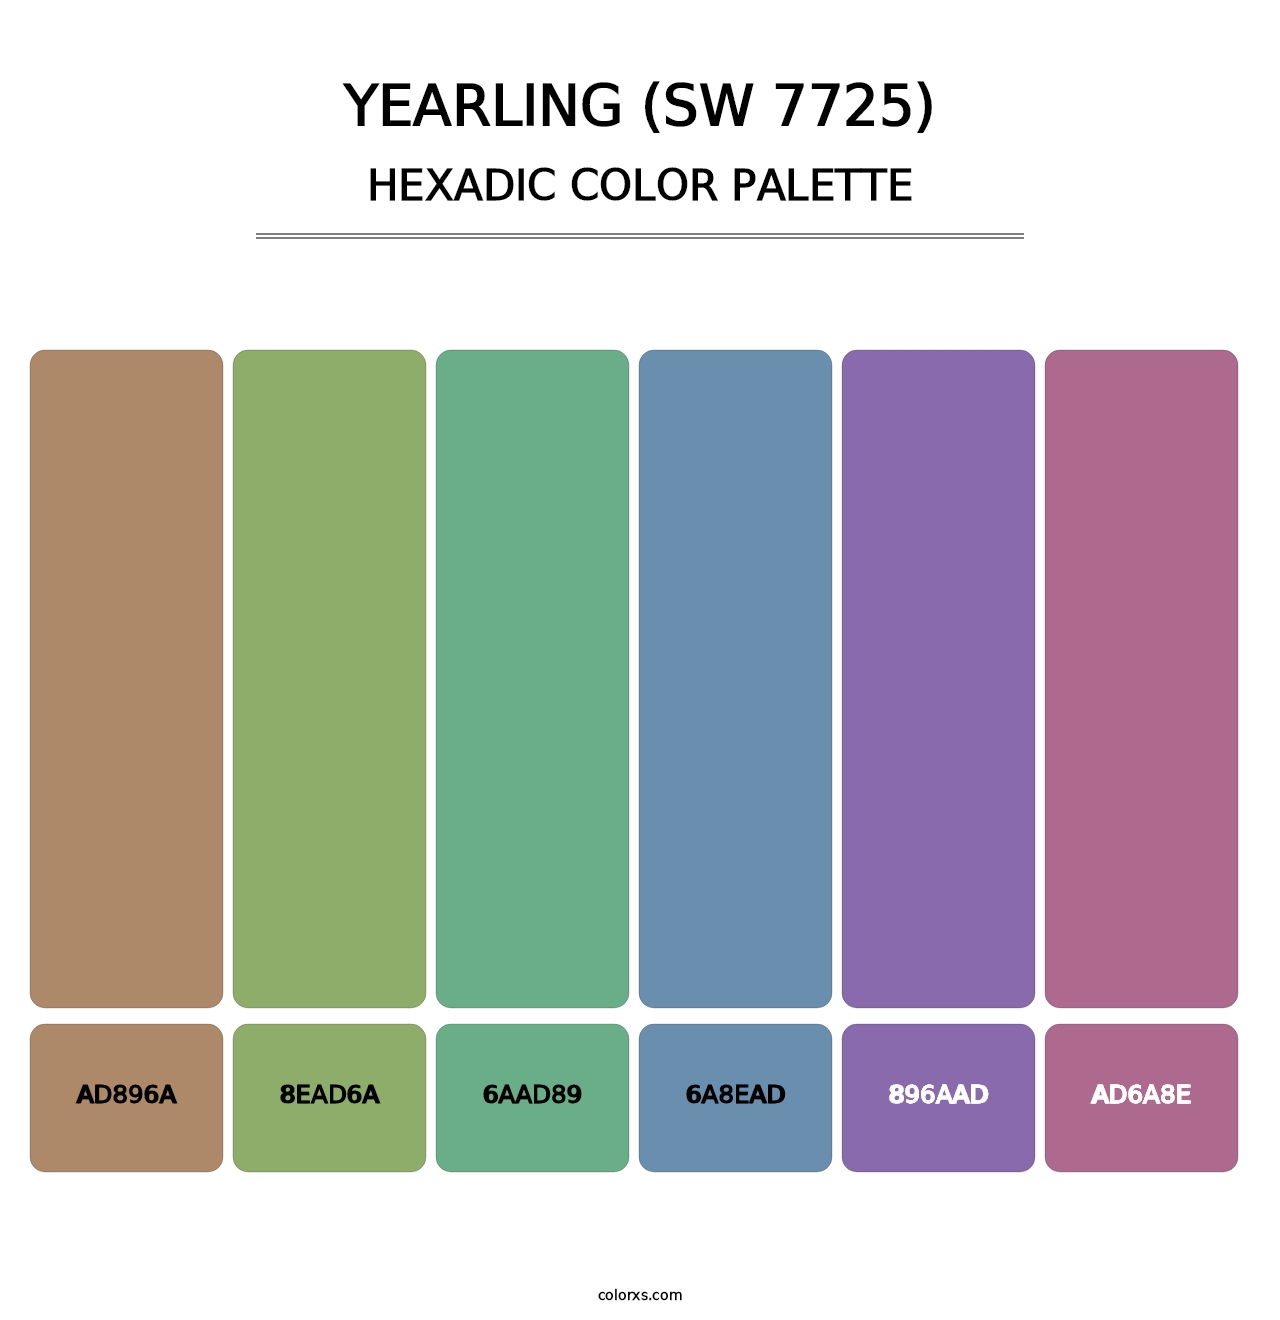 Yearling (SW 7725) - Hexadic Color Palette